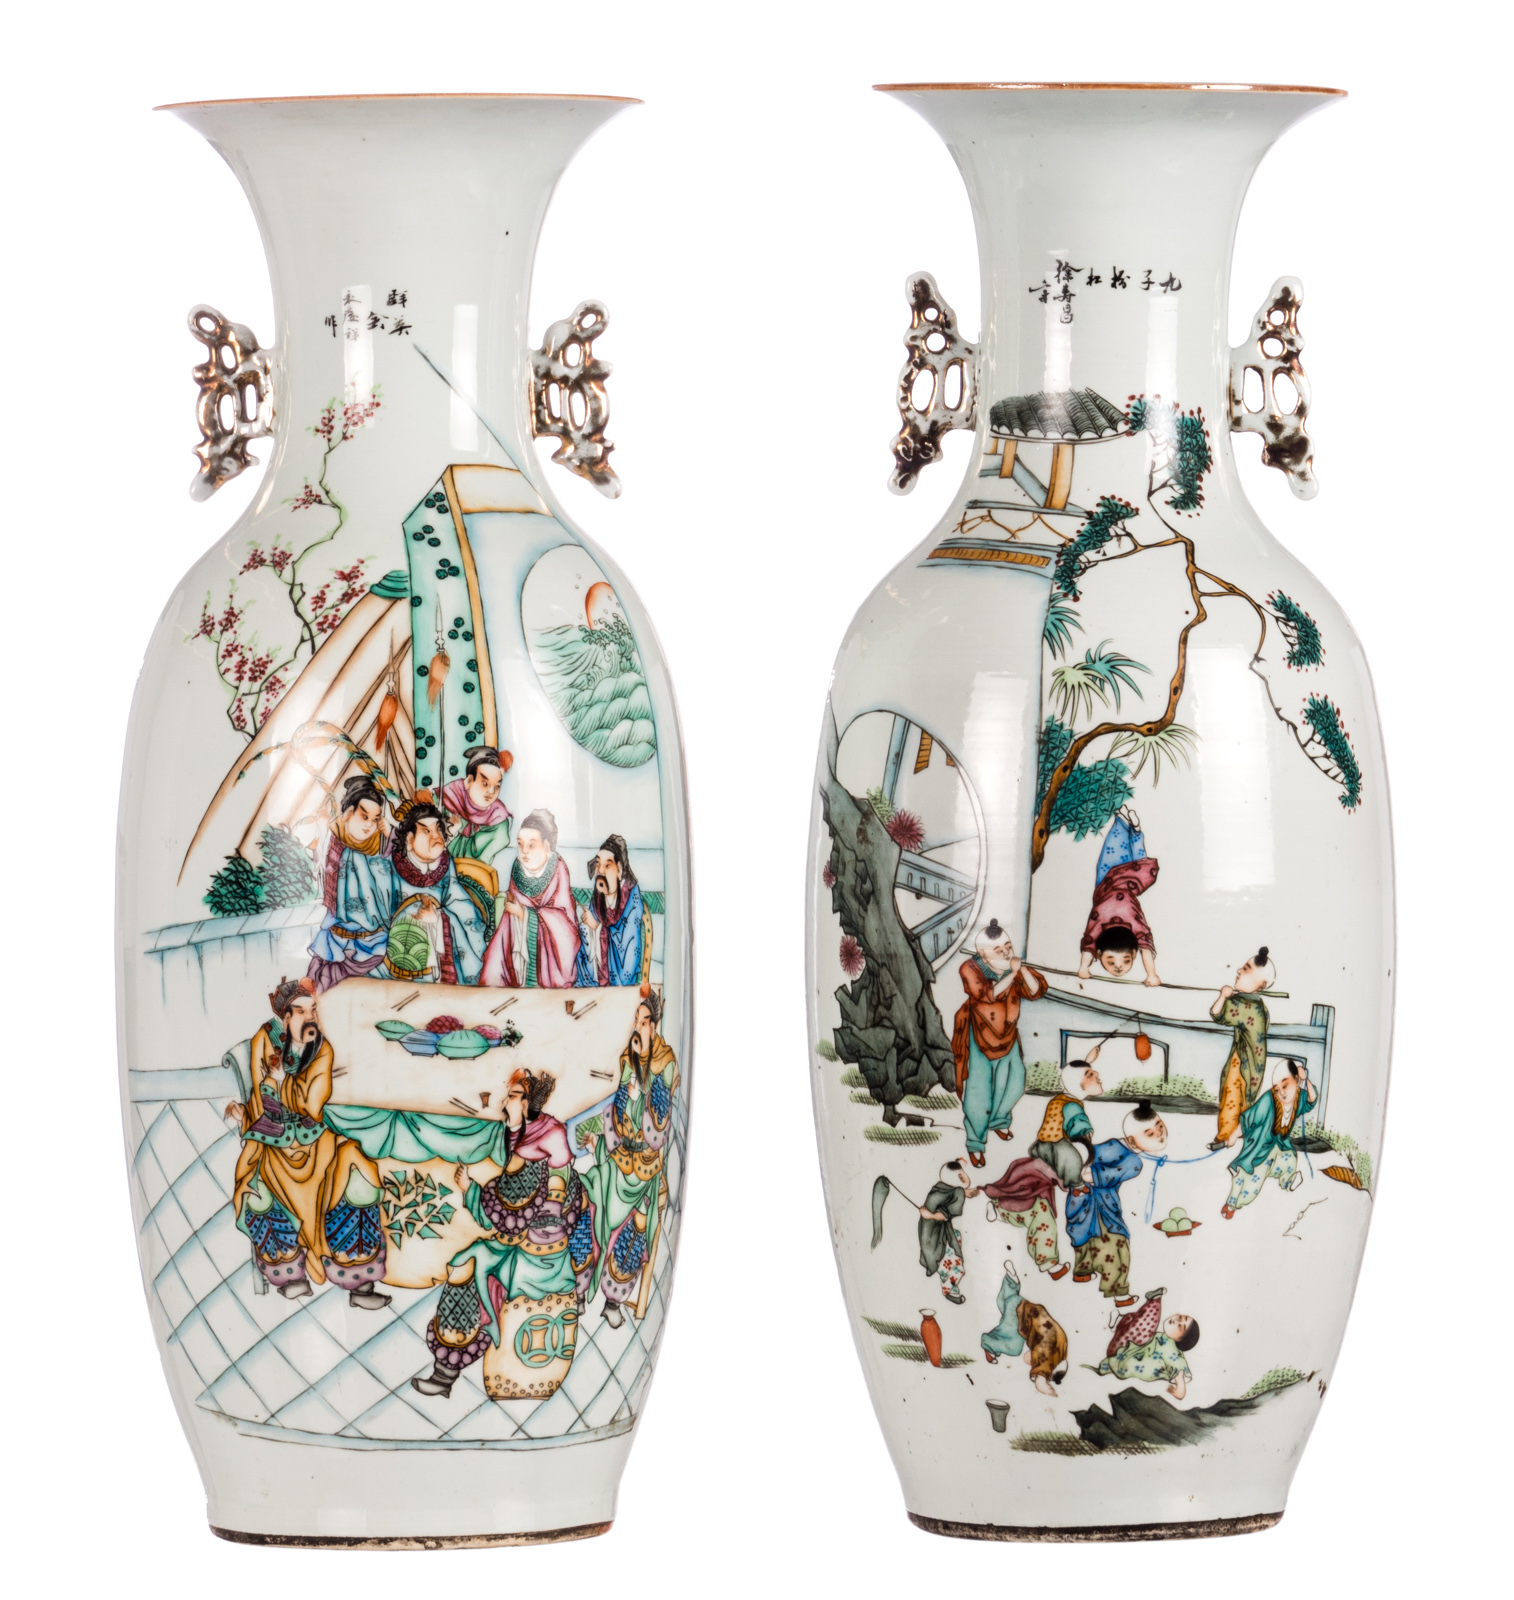 Two Chinese vases, polychrome and famille rose decorated, with an animated scene, playing children